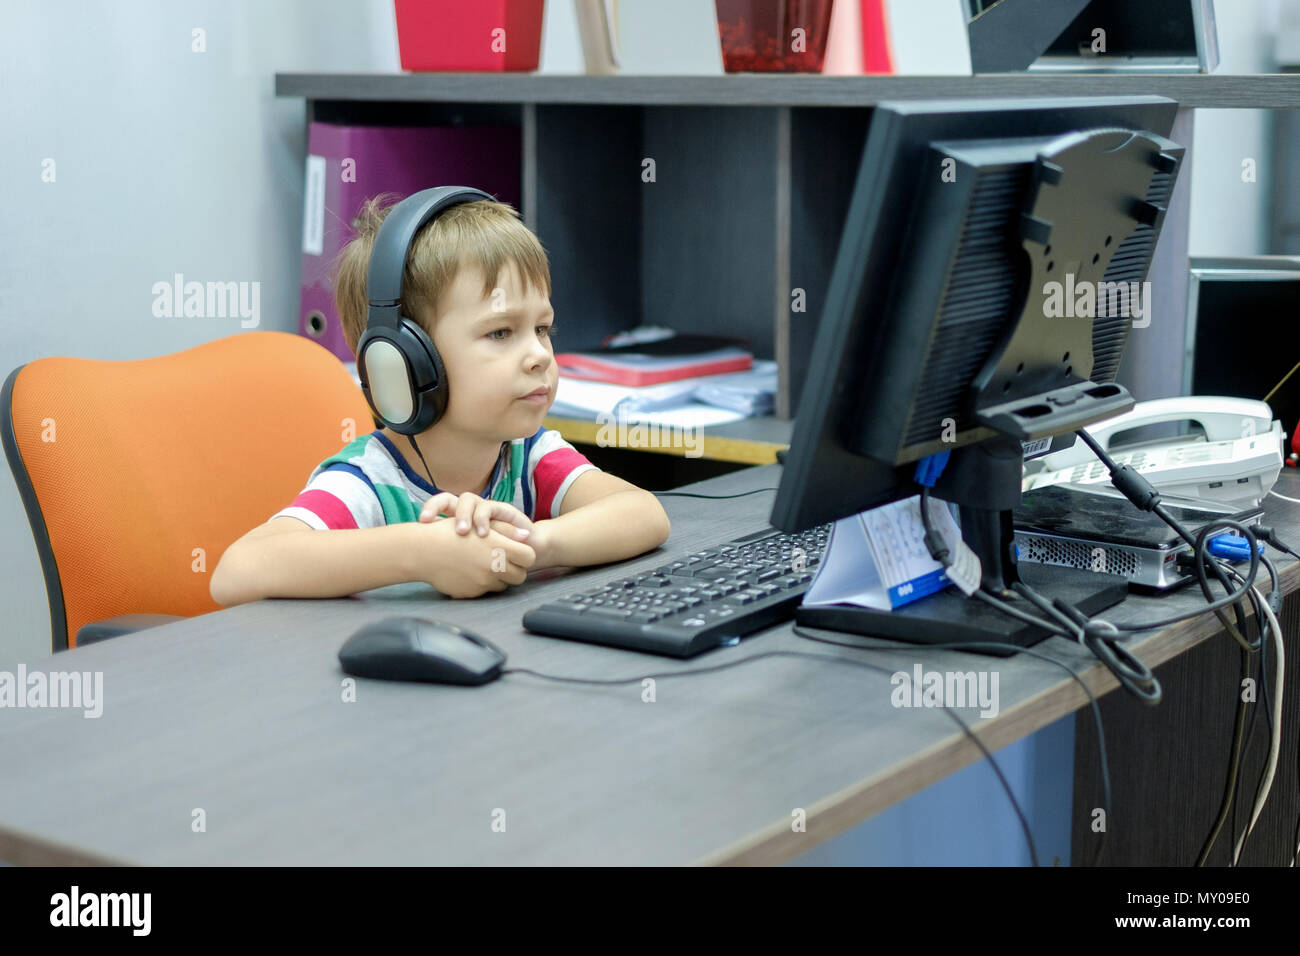 Little boy with headphones sitting at computer in office Stock Photo